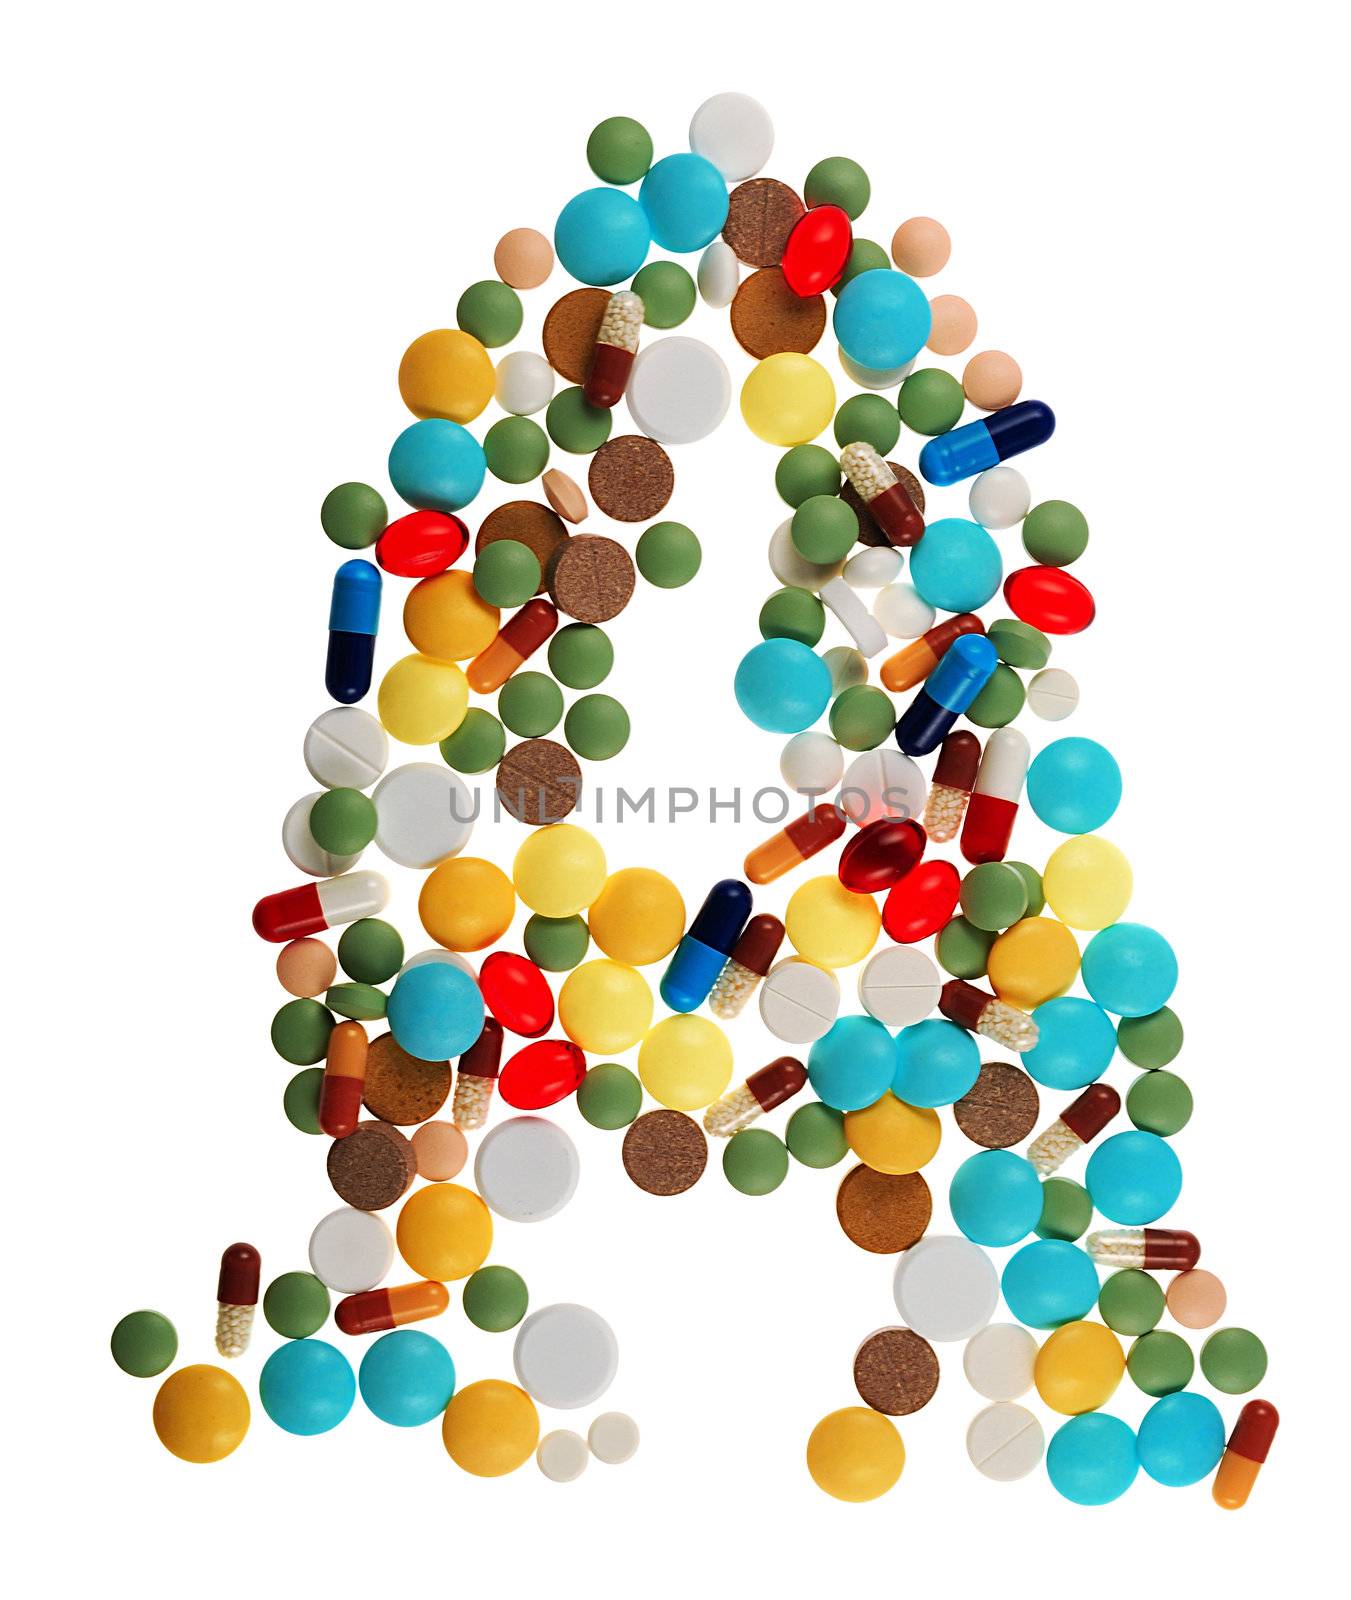 pharmacy background in "A" letter style by Sergieiev